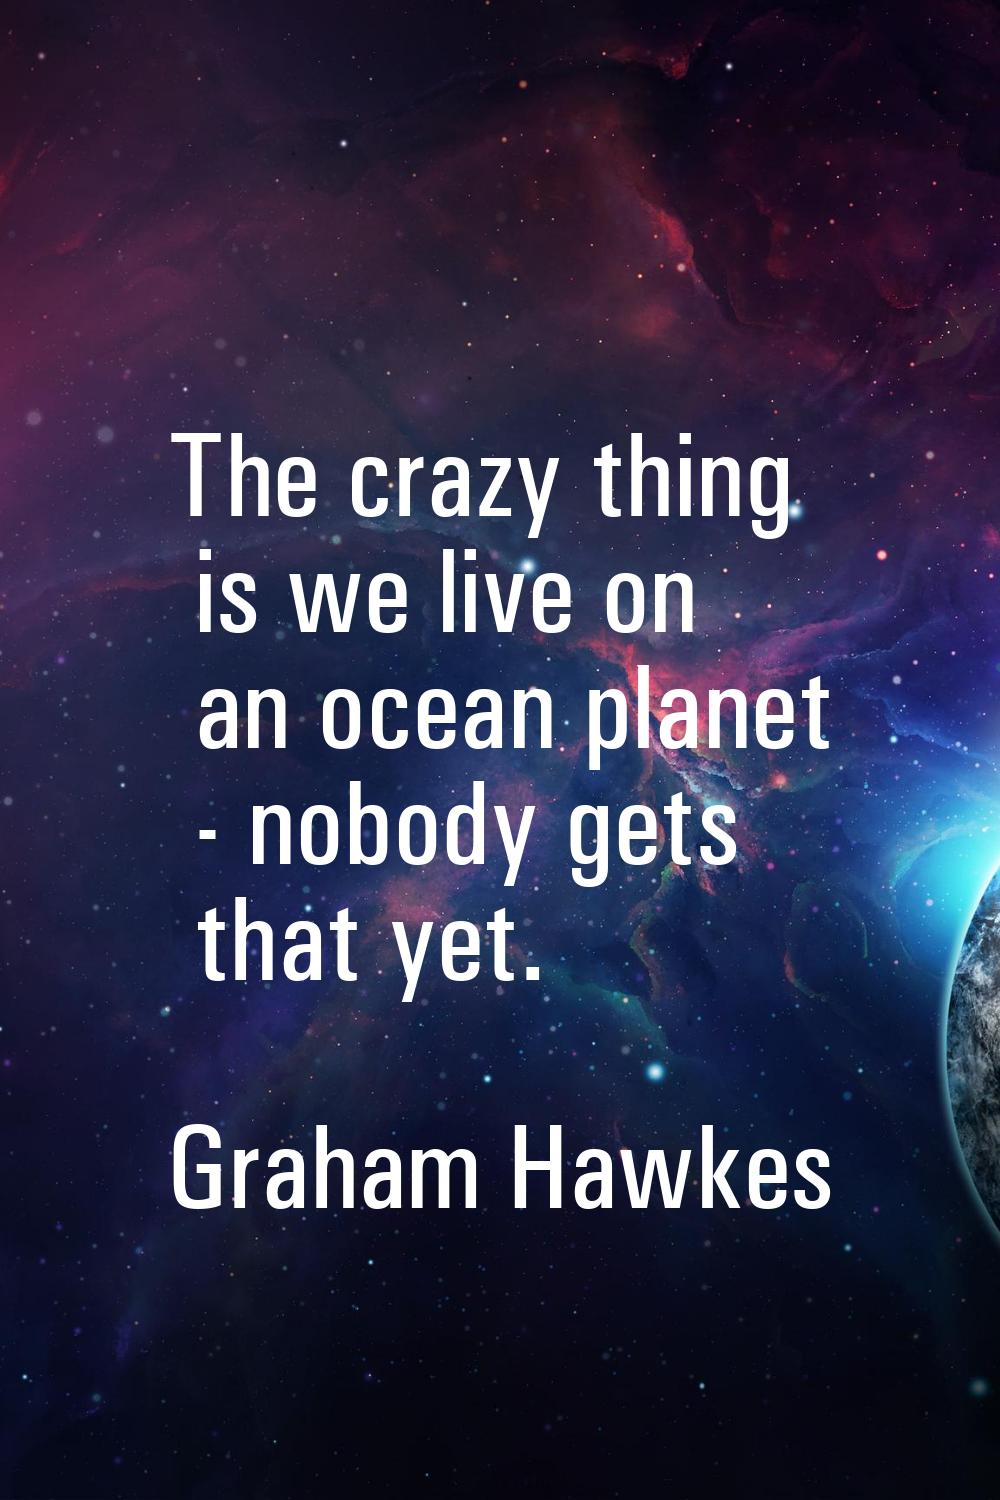 The crazy thing is we live on an ocean planet - nobody gets that yet.